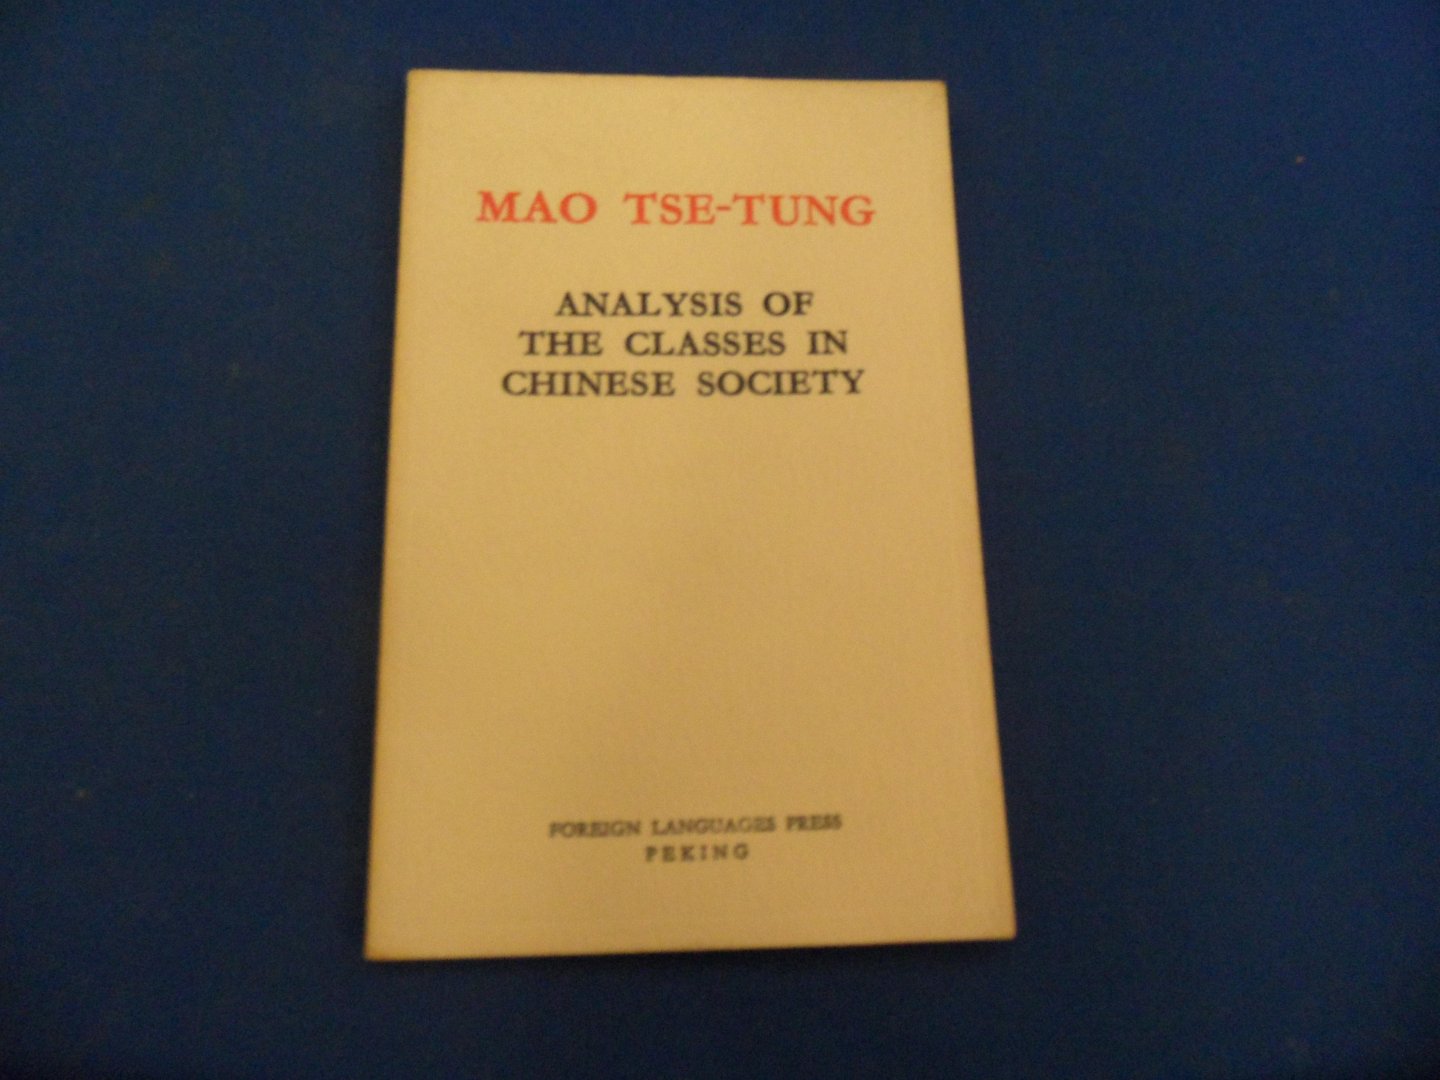 Tse-Tung, Mao - Analysis of the classes in Chinese Society